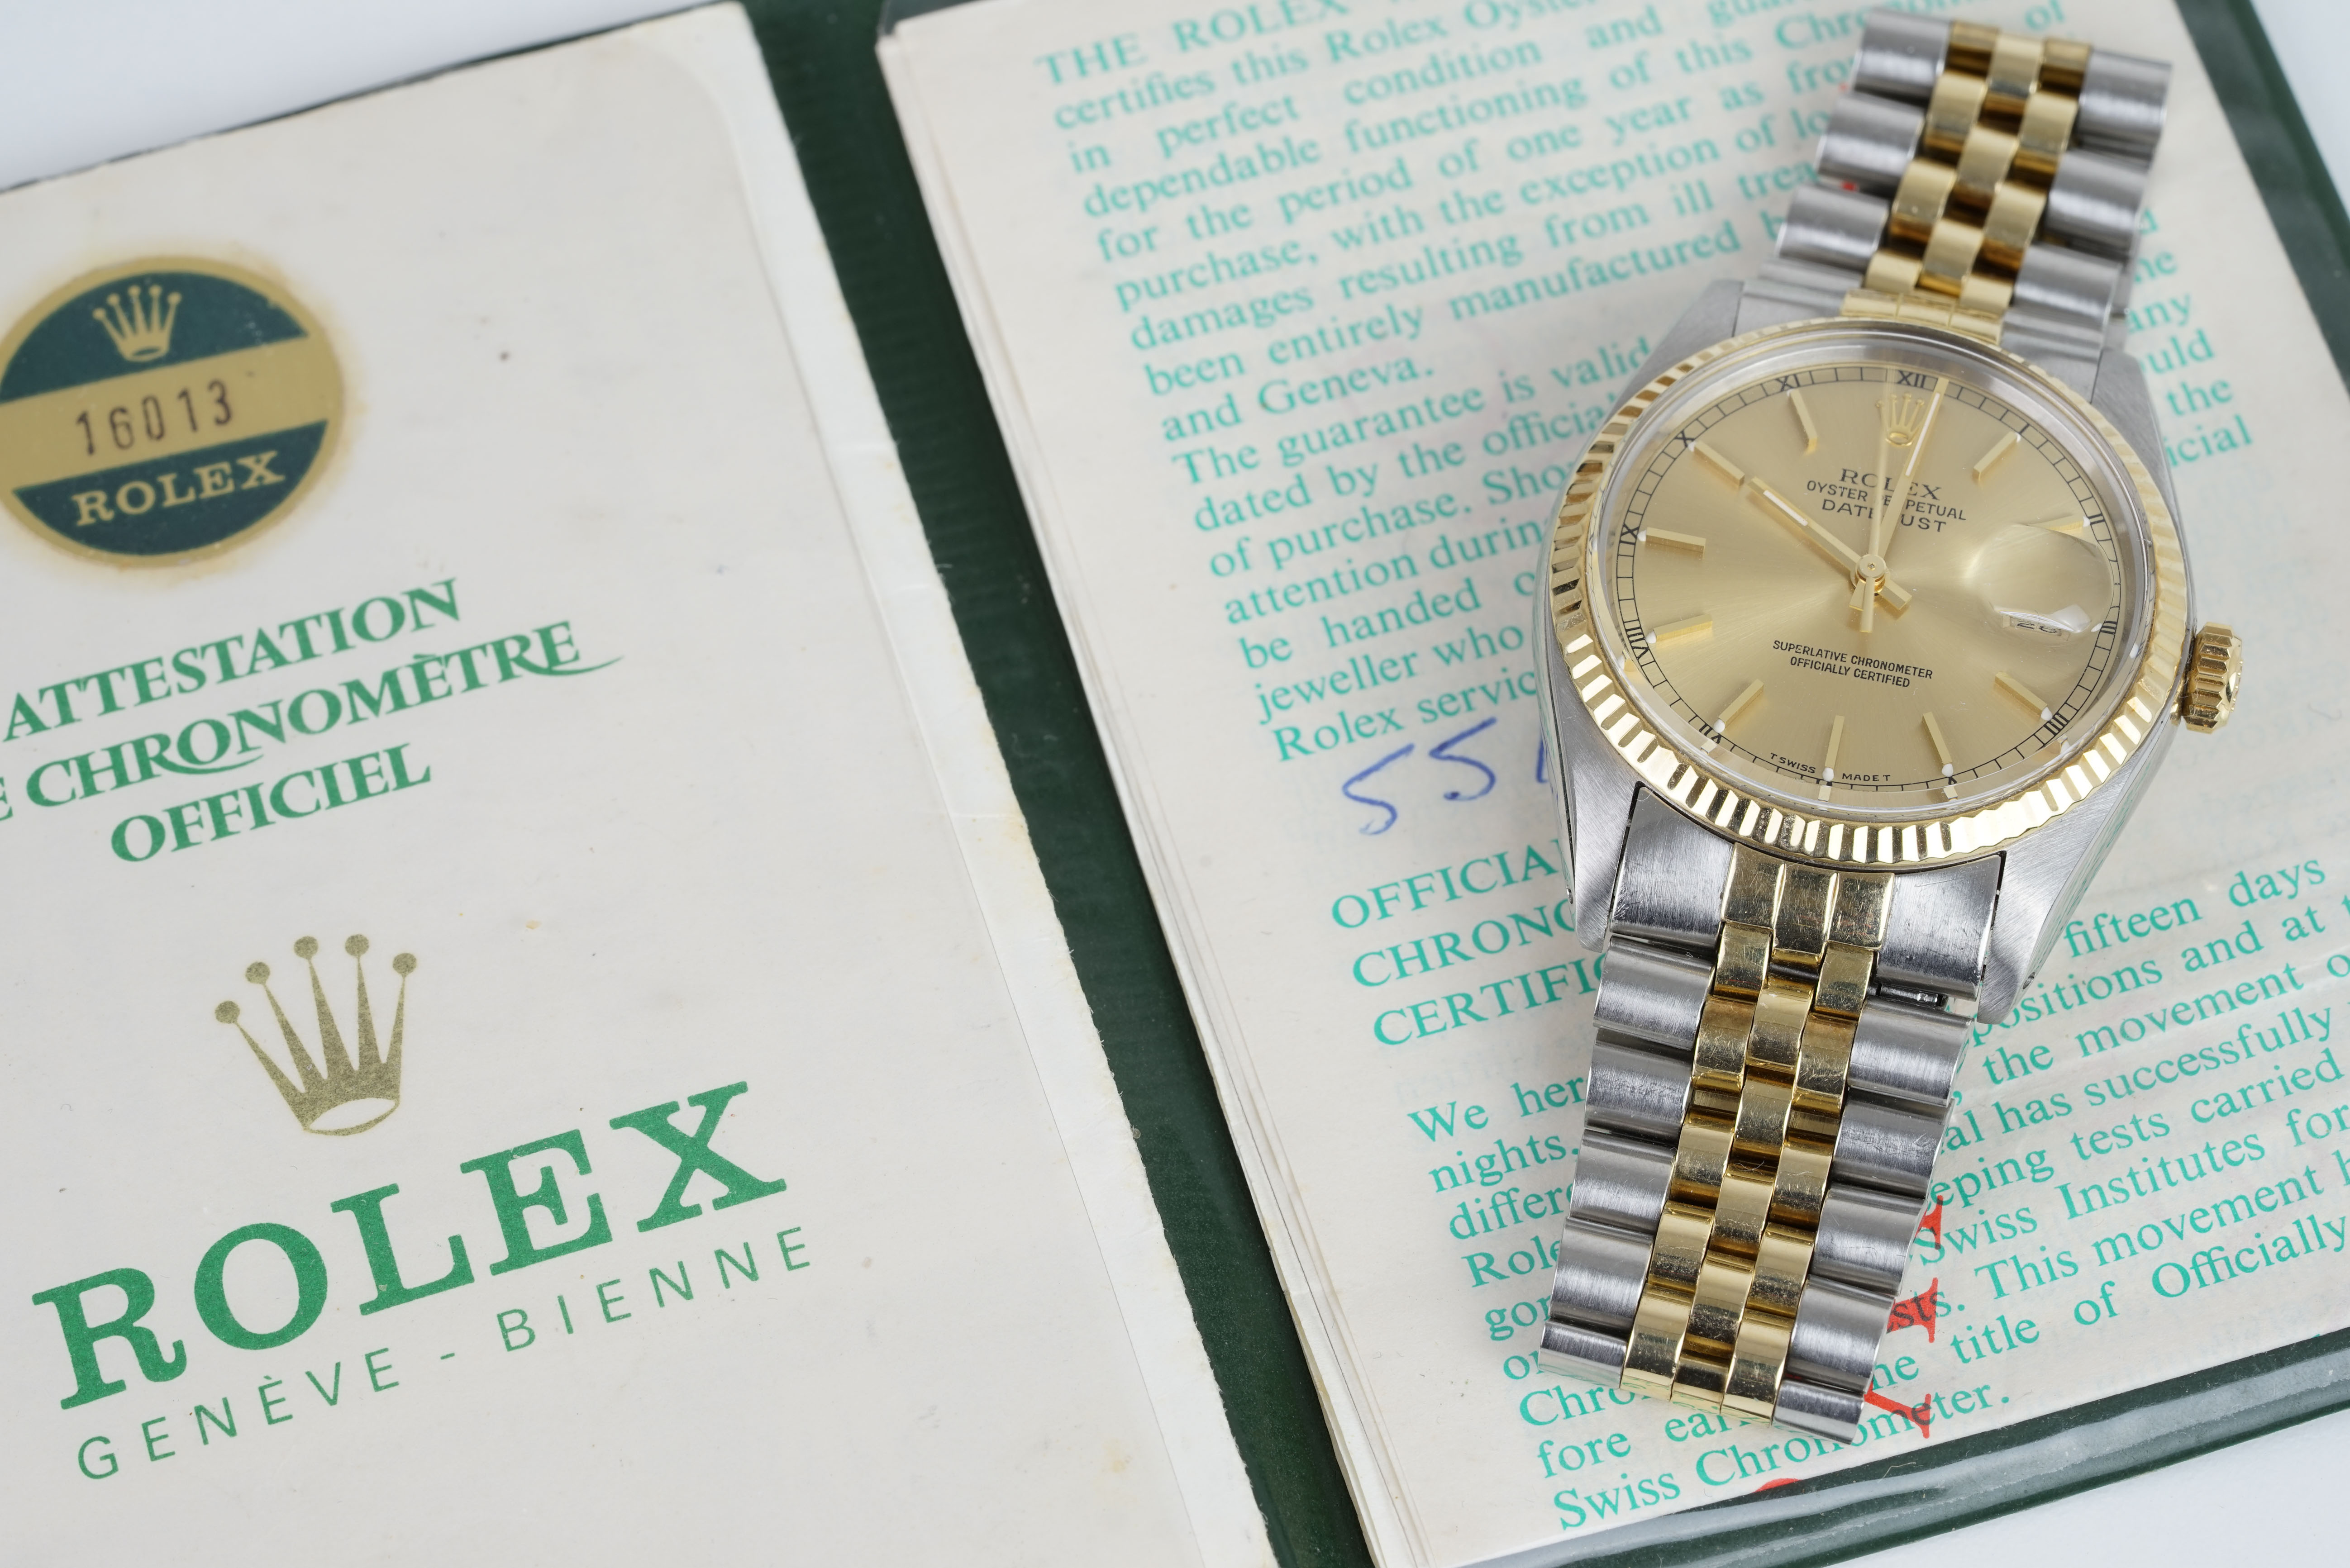 GENTLEMENS ROLEX OYSTER PERPETUAL DATEJUST STEEL & GOLD WRISTWATCH W/ GUARANTEE PAPERS REF. 16030